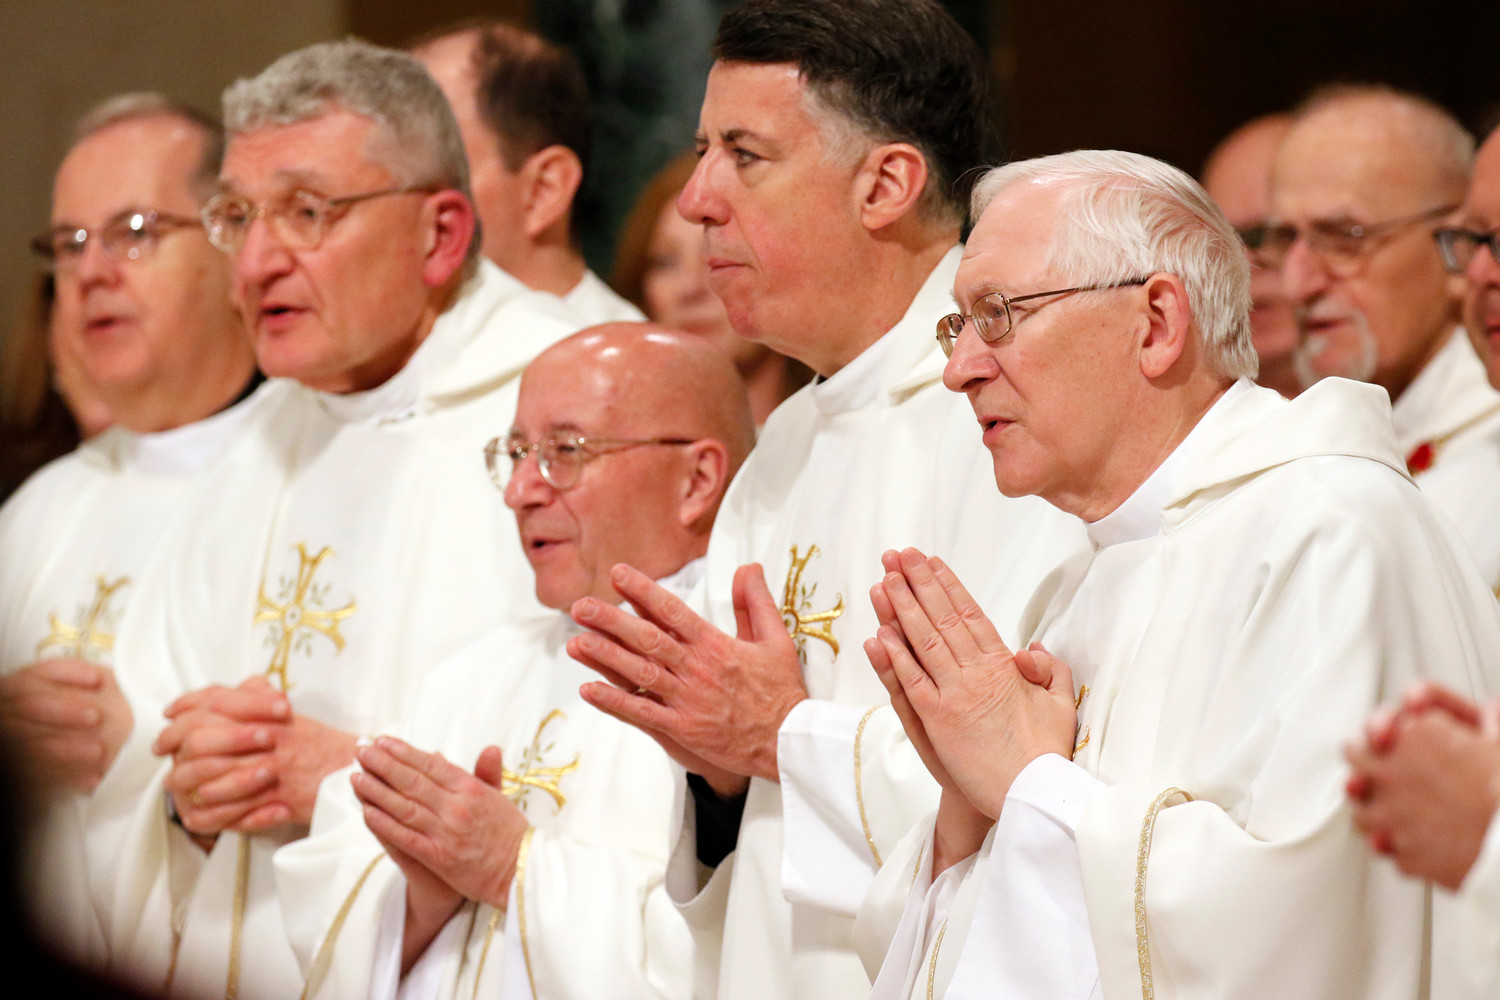 Archbishop Leonard P. Blair of Hartford, Conn., right, prays with fellow bishops during the opening Mass of the National Prayer Vigil for Life Jan. 17 at the Basilica of the National Shrine of the Immaculate Conception in Washington.